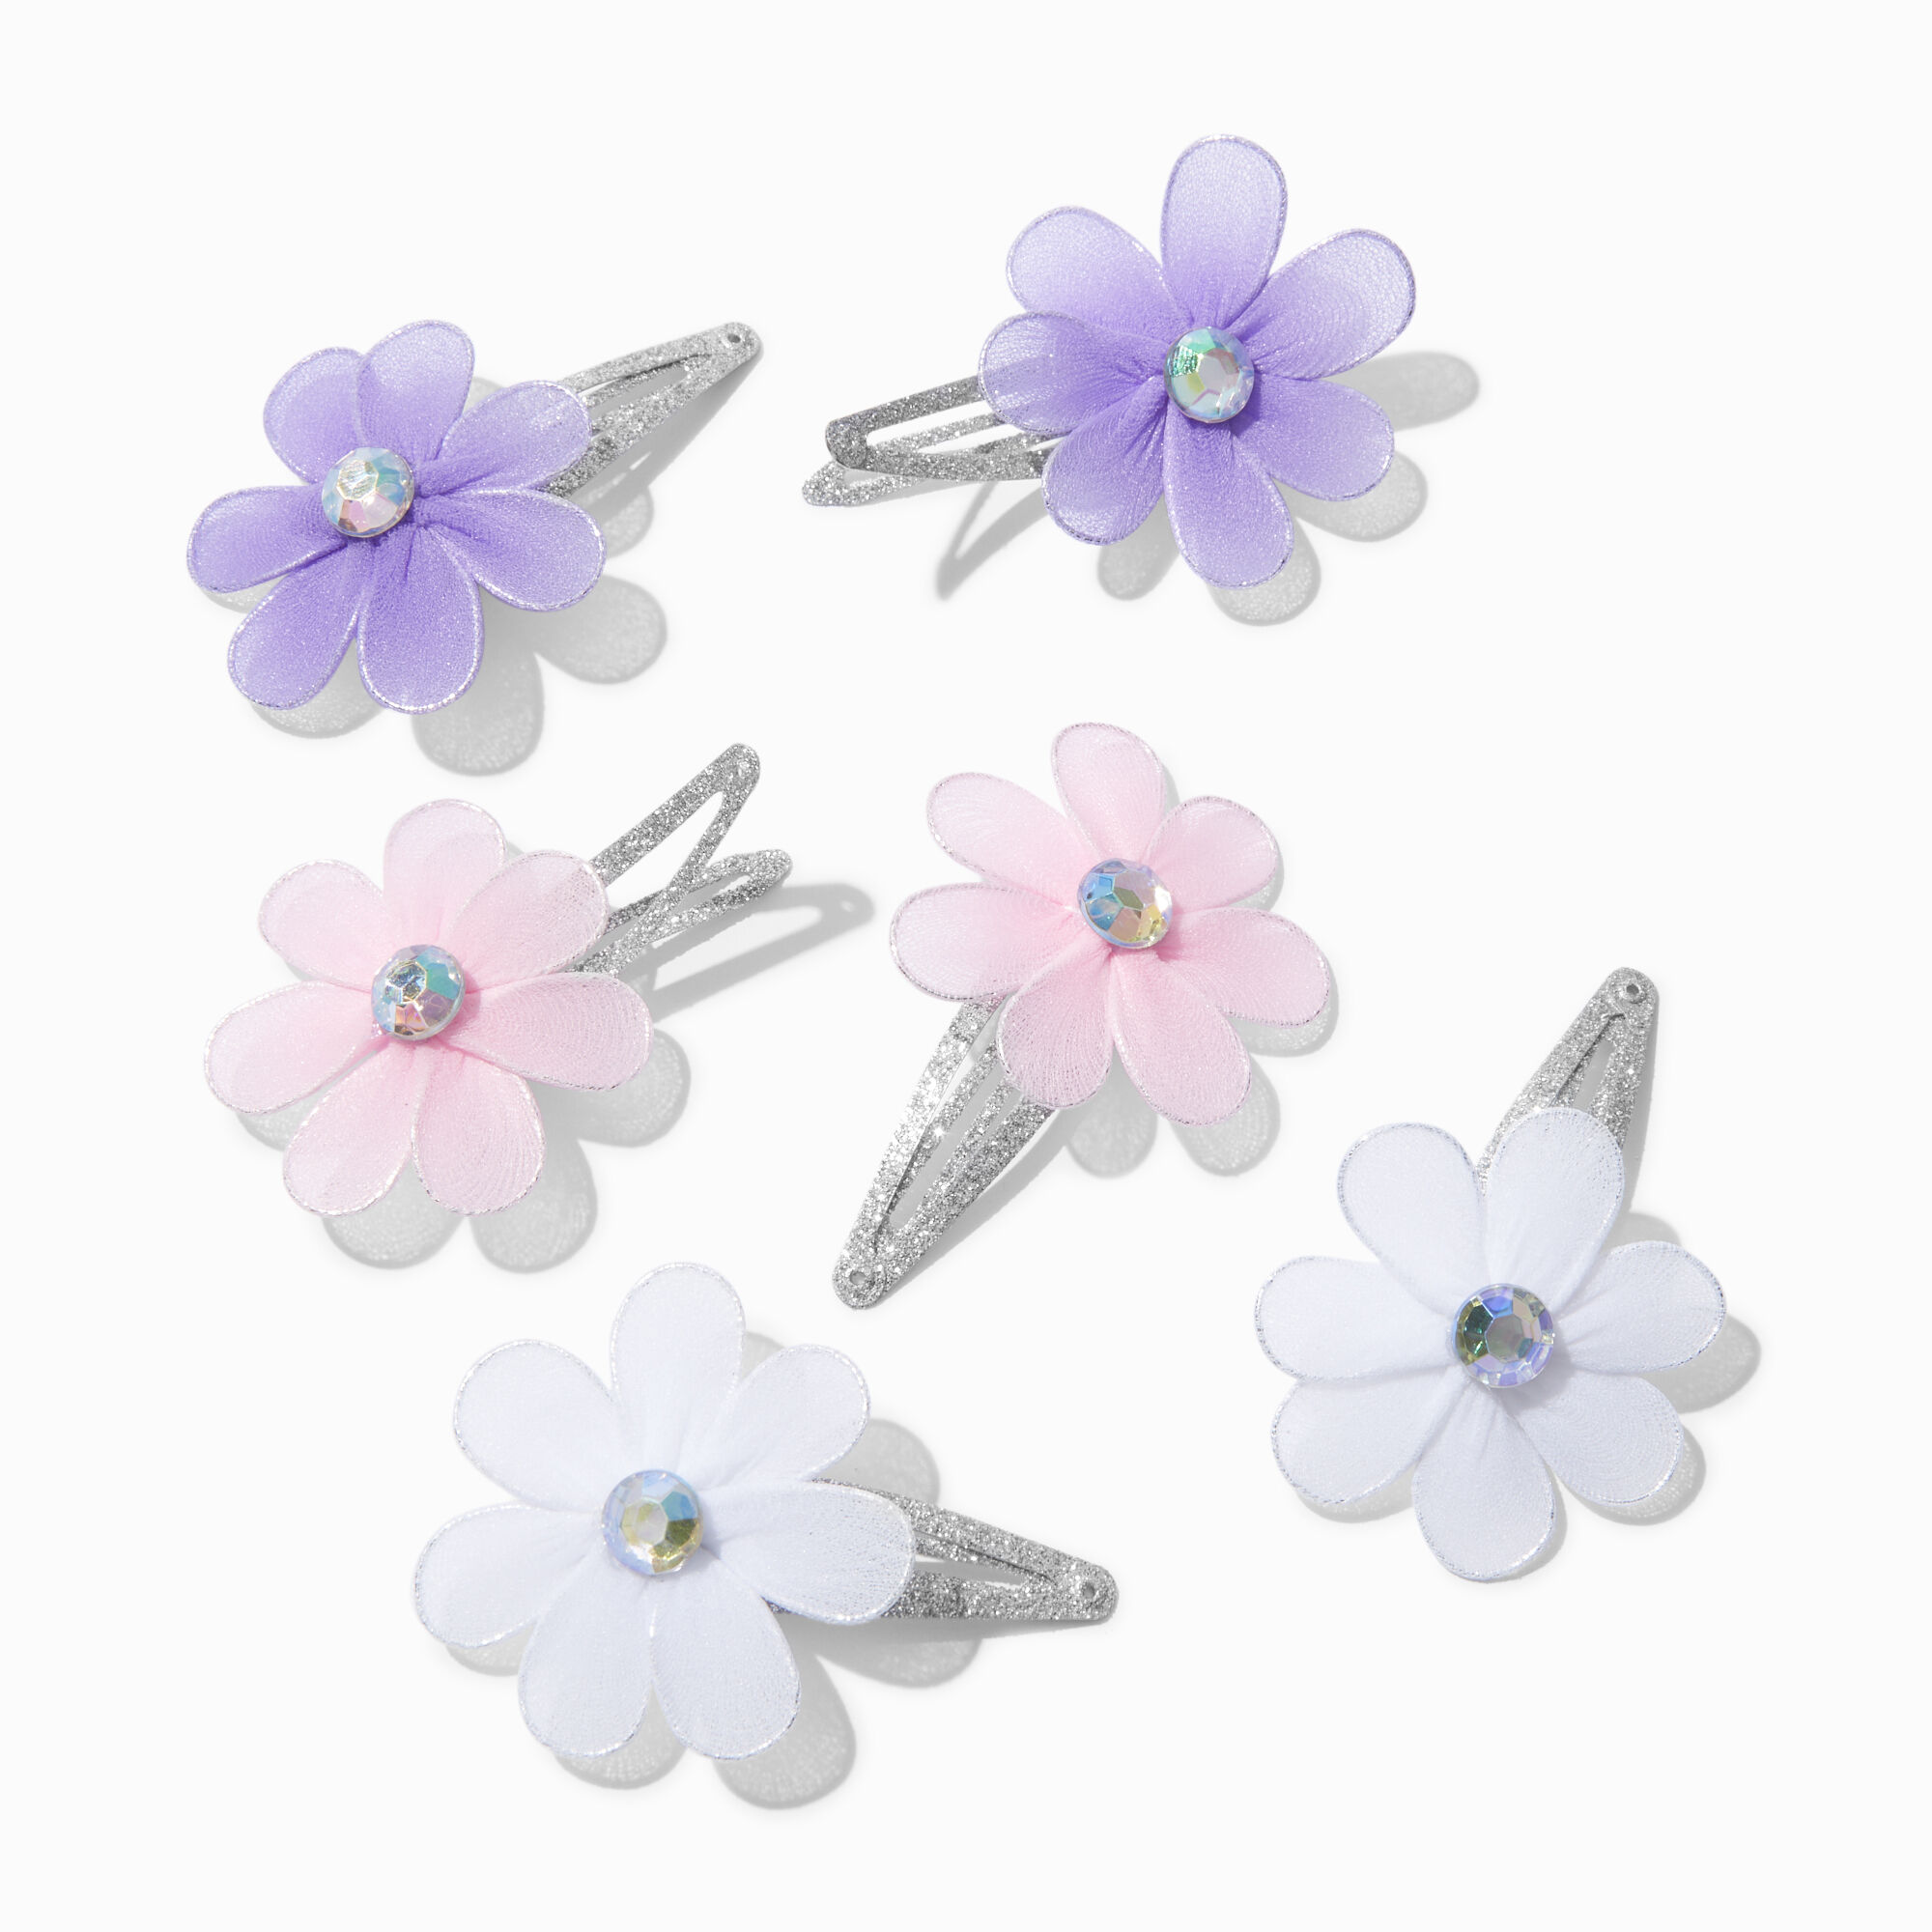 View Claires Club Daisy Snap Hair Clips 6 Pack information